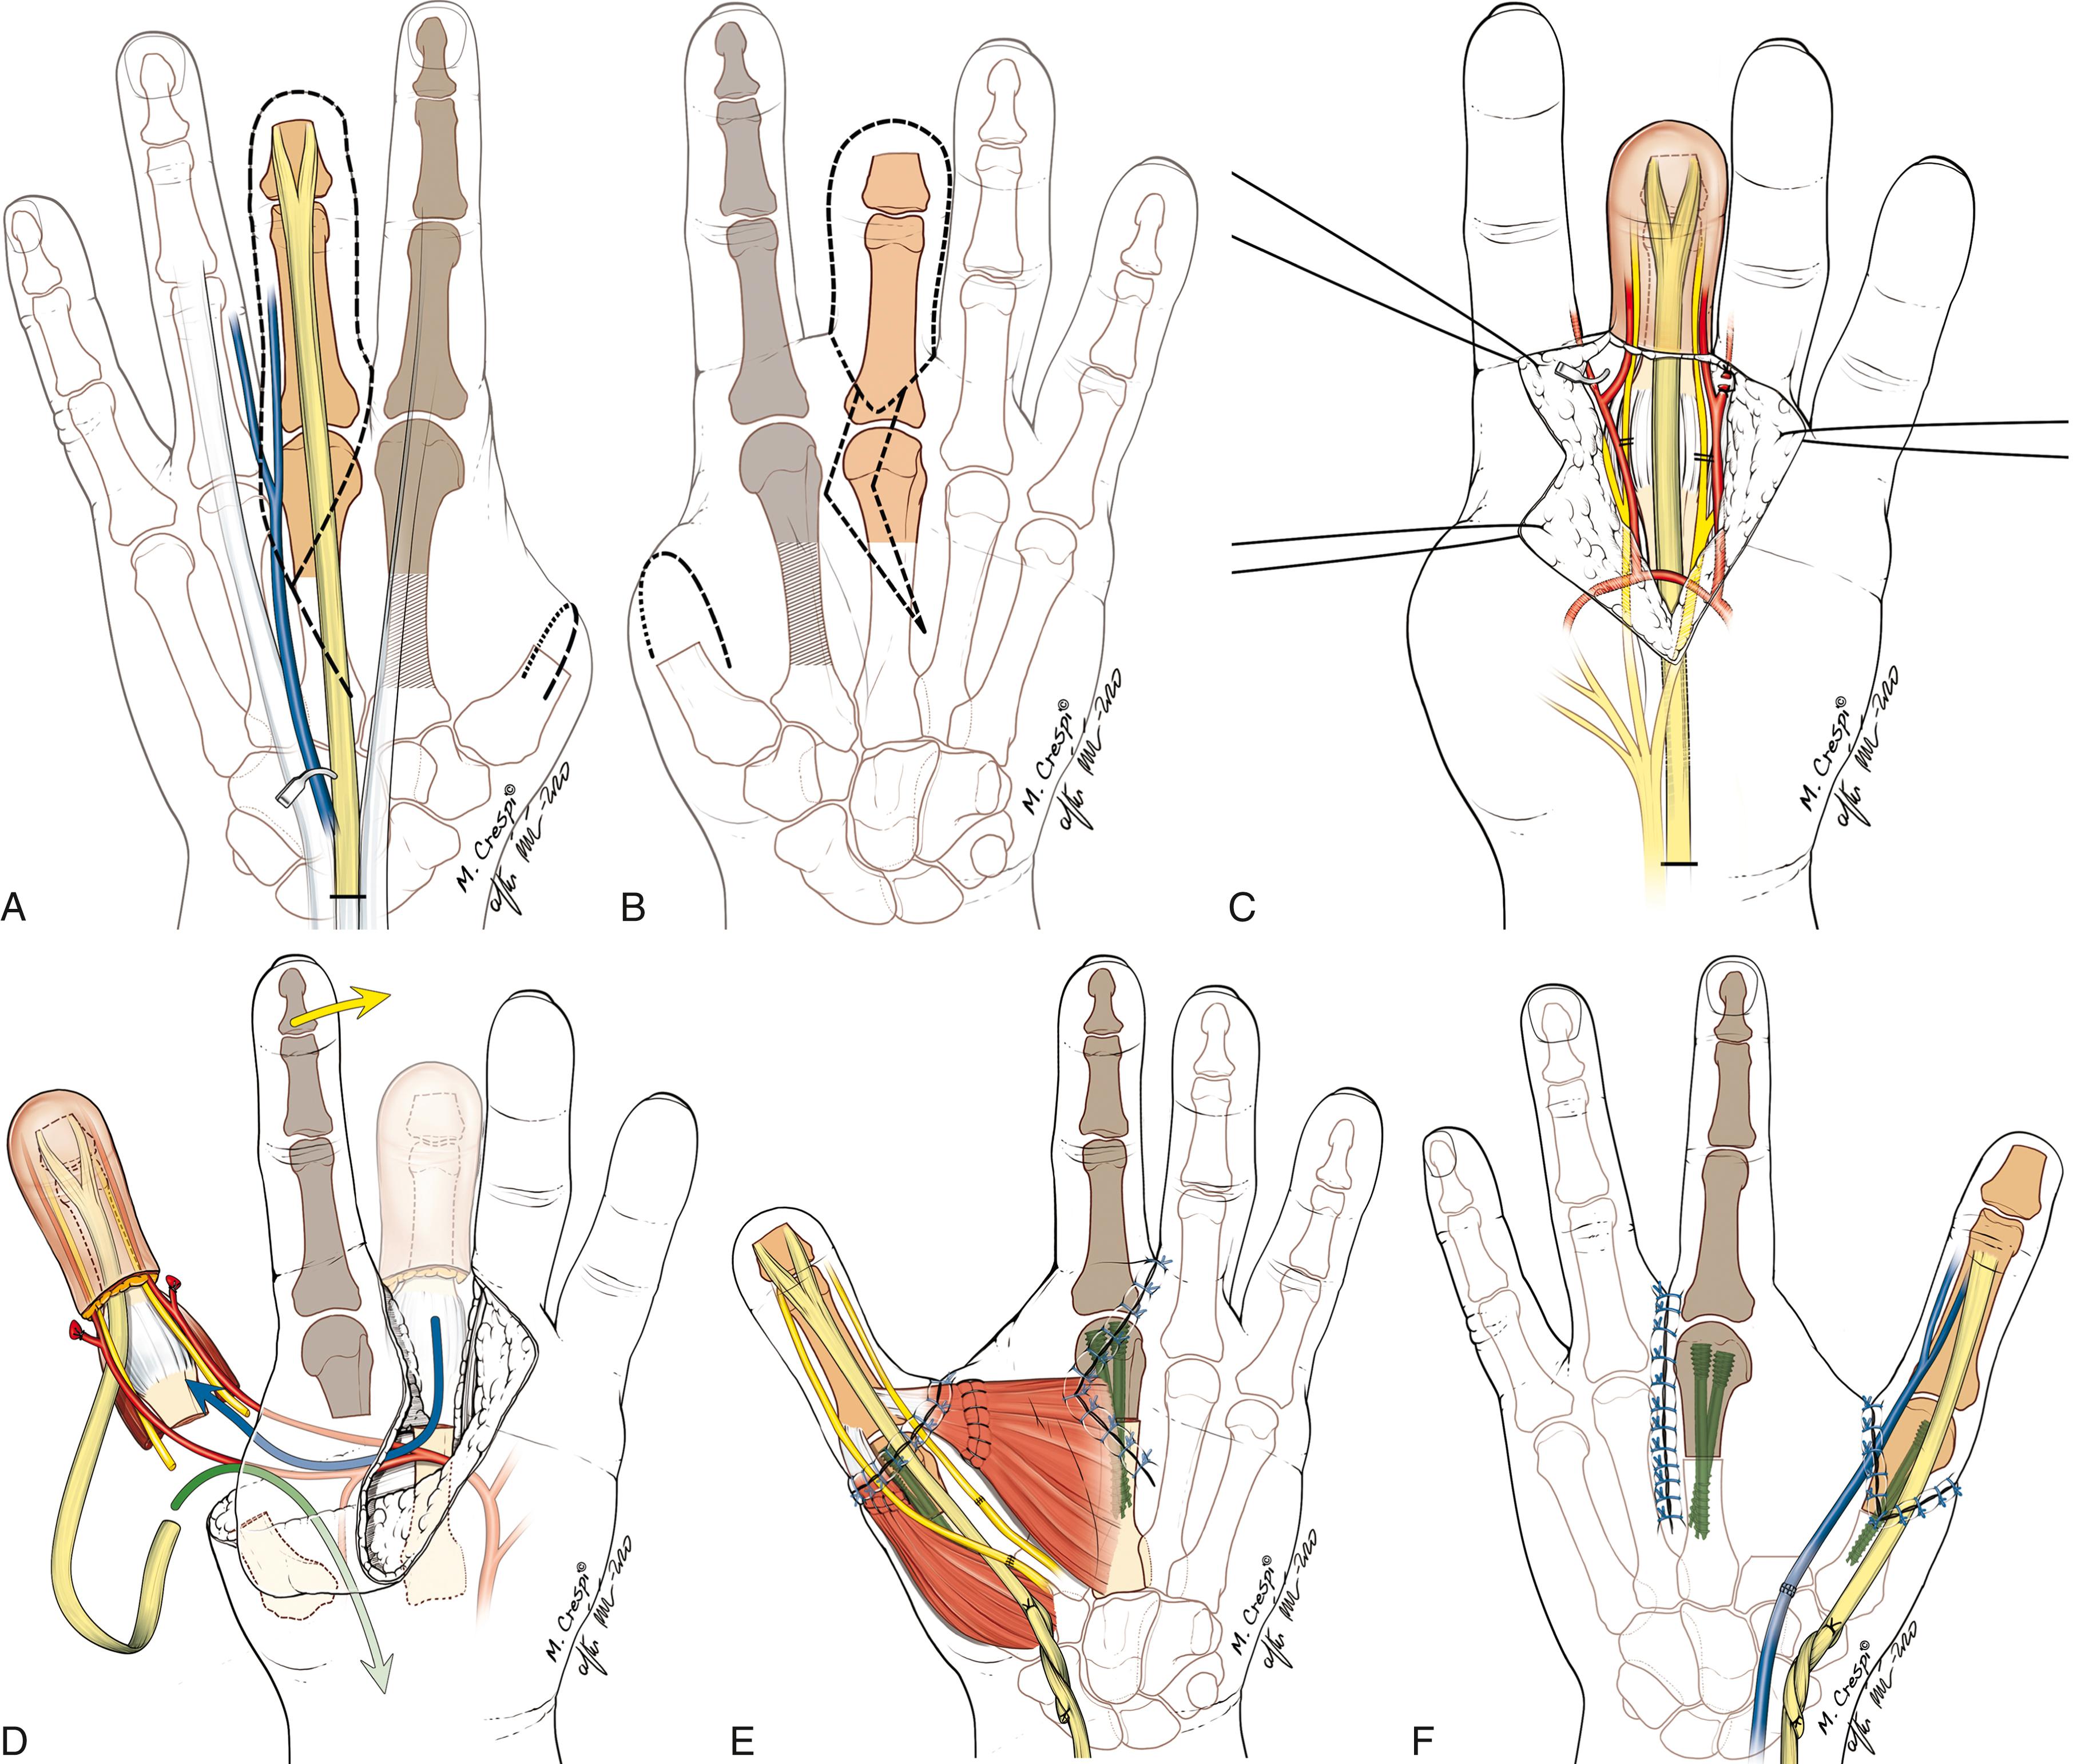 Fig. 48.20, A to F, Author’s recommended technique for pollicization of a middle finger stump. Note that the nerves of the middle finger are “reconnected” to the nerve of the thumb.